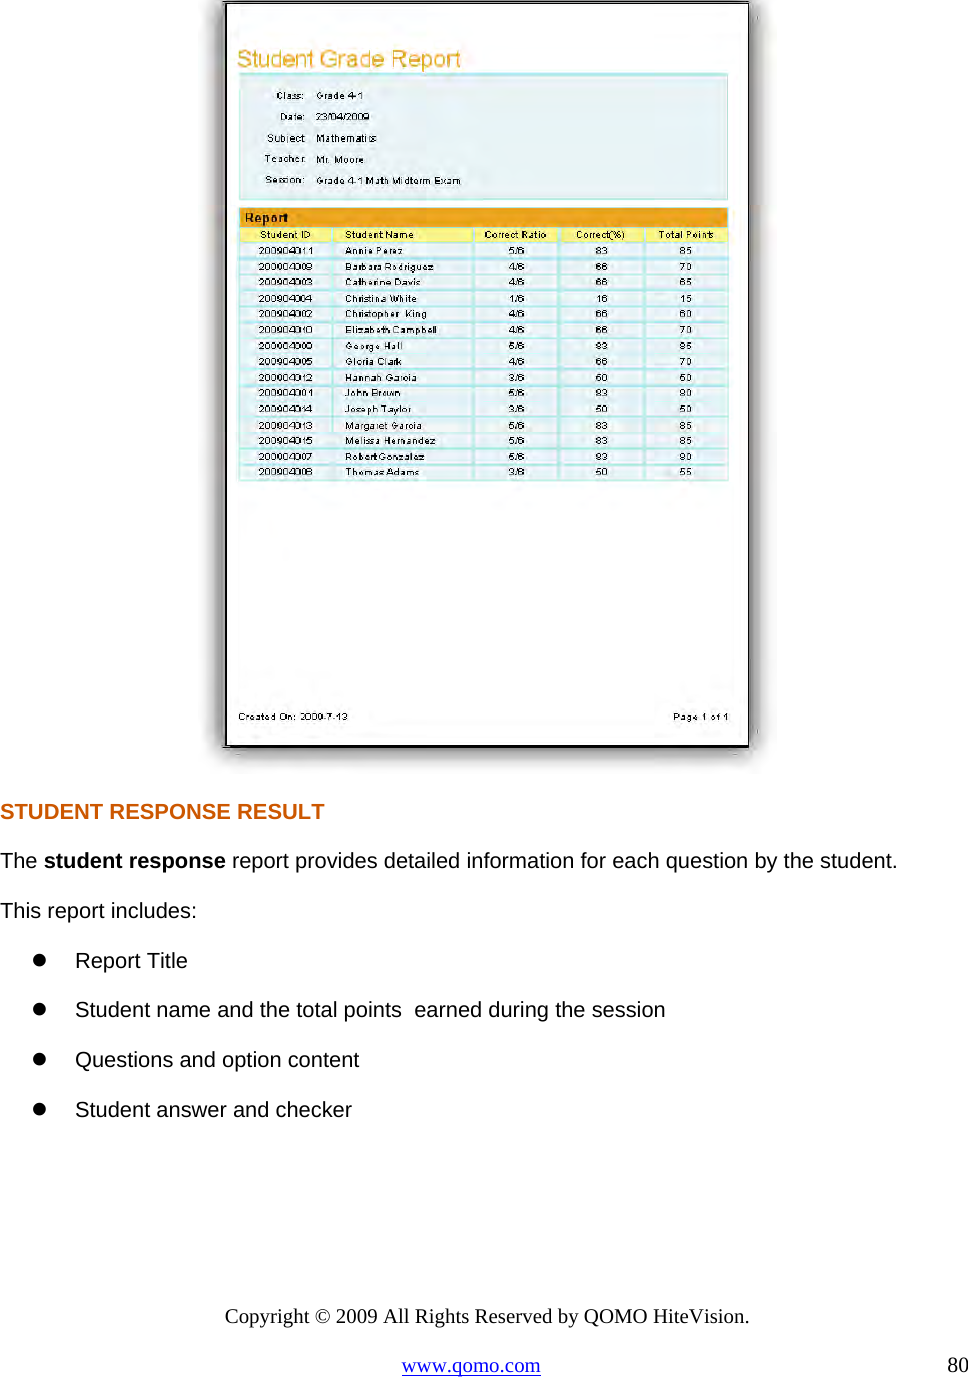 Copyright © 2009 All Rights Reserved by QOMO HiteVision. www.qomo.com                                                                          80   STUDENT RESPONSE RESULT The student response report provides detailed information for each question by the student.  This report includes:   Report Title   Student name and the total points  earned during the session   Questions and option content   Student answer and checker 